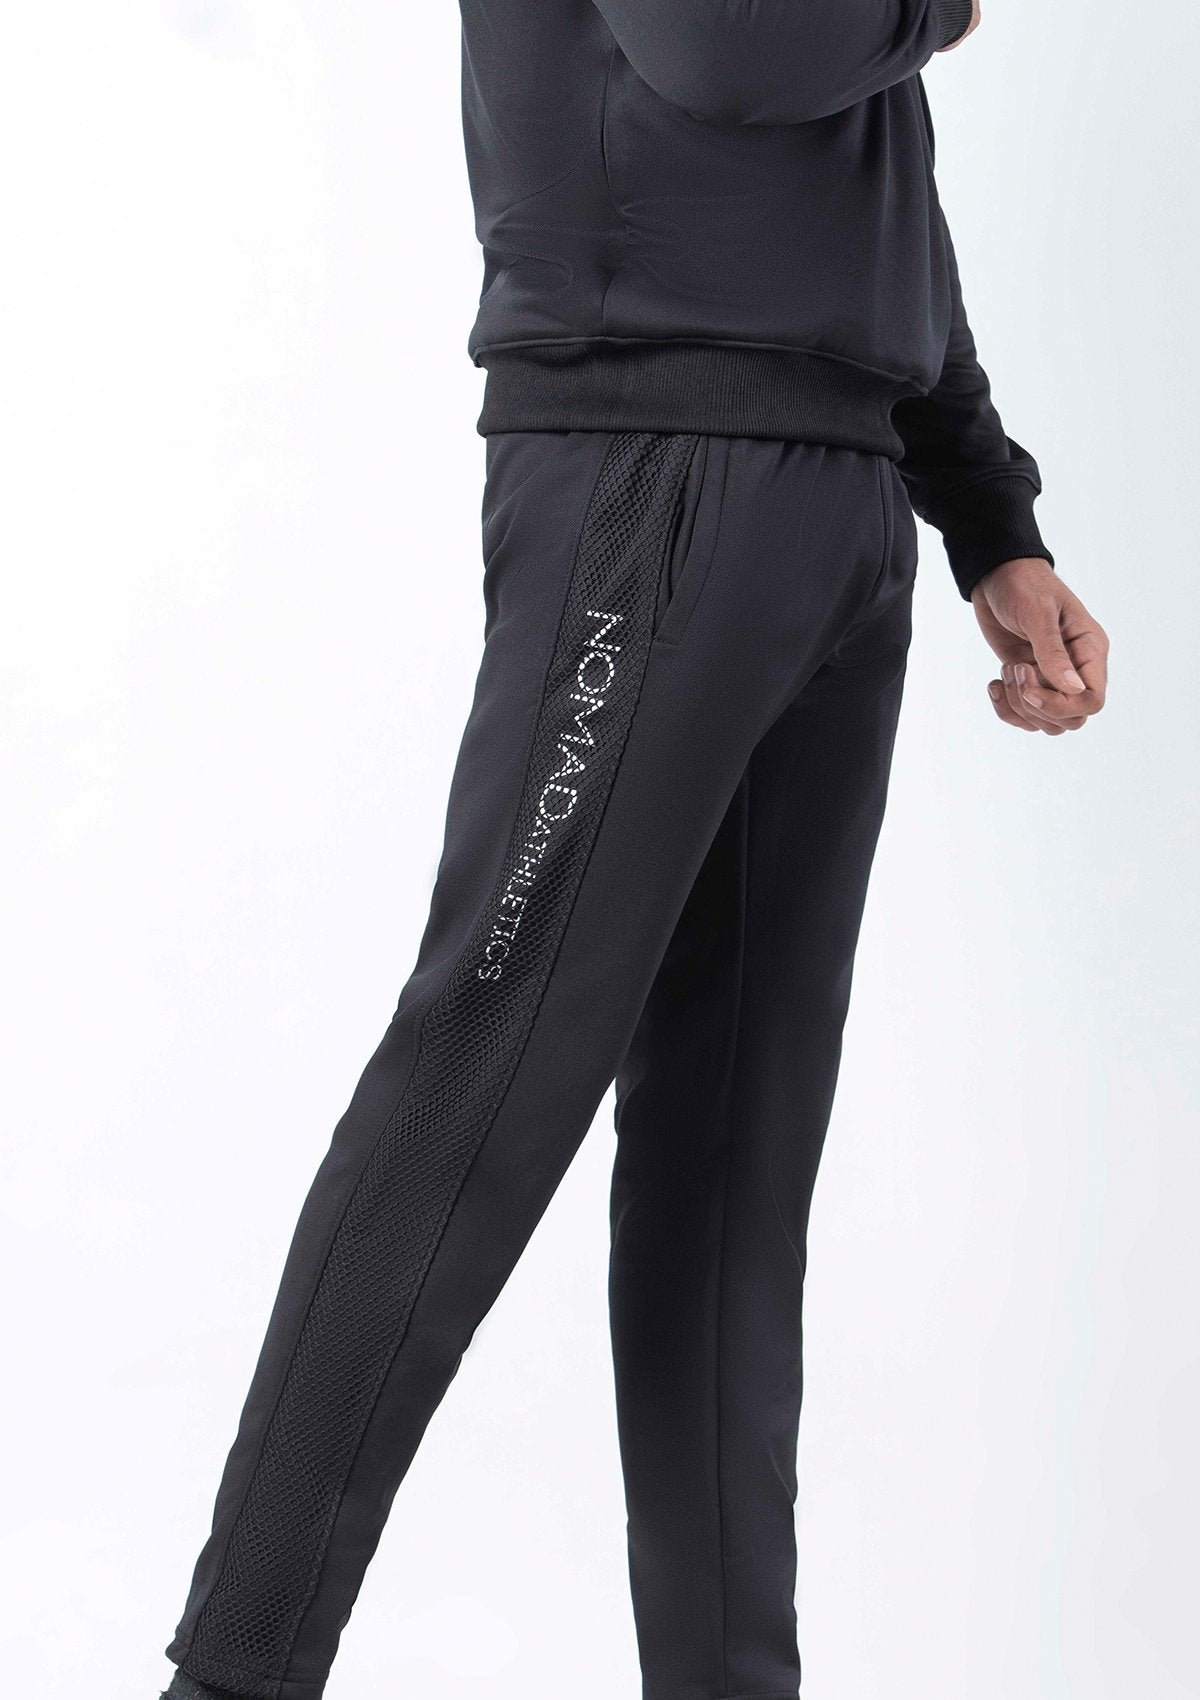 MESH-TROUSERS-BLACK - Nomad Apparel